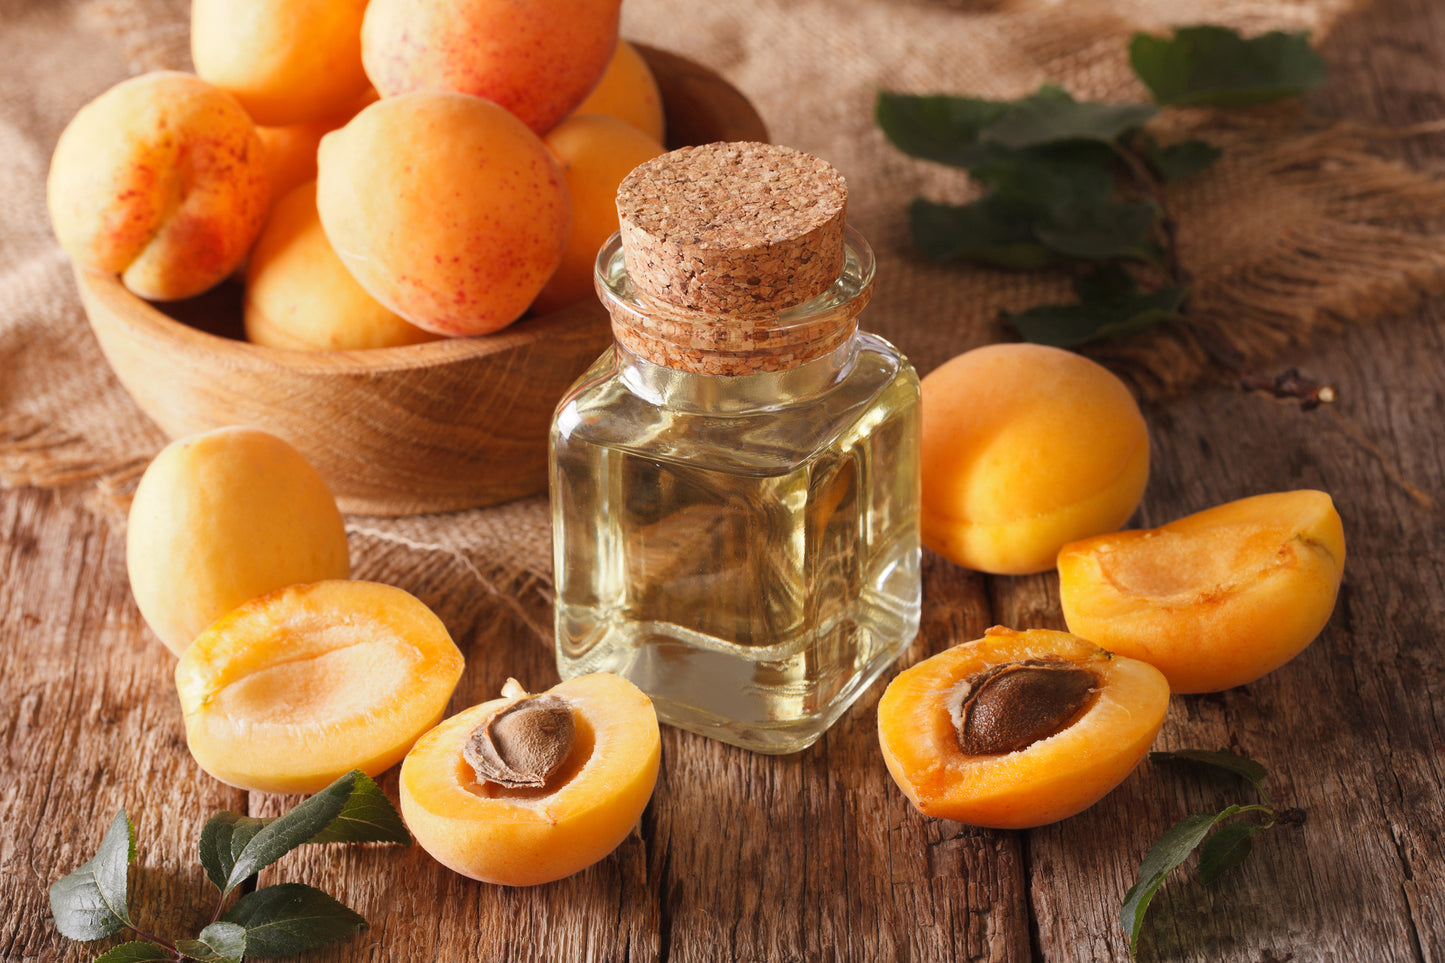 APRICOT CURRANT - Inspired by Lush® Sultana / Blackberry / Bewitched - an incredible fresh clean scent with notes of bergamot, apricot, and slight sweet currant notes.  Available in Perfume Oil, Body Spray, Fragrance Oil, Solid Perfume, Soap, Lotion, Wax Melts, Cologne, Beard Balm and More. 